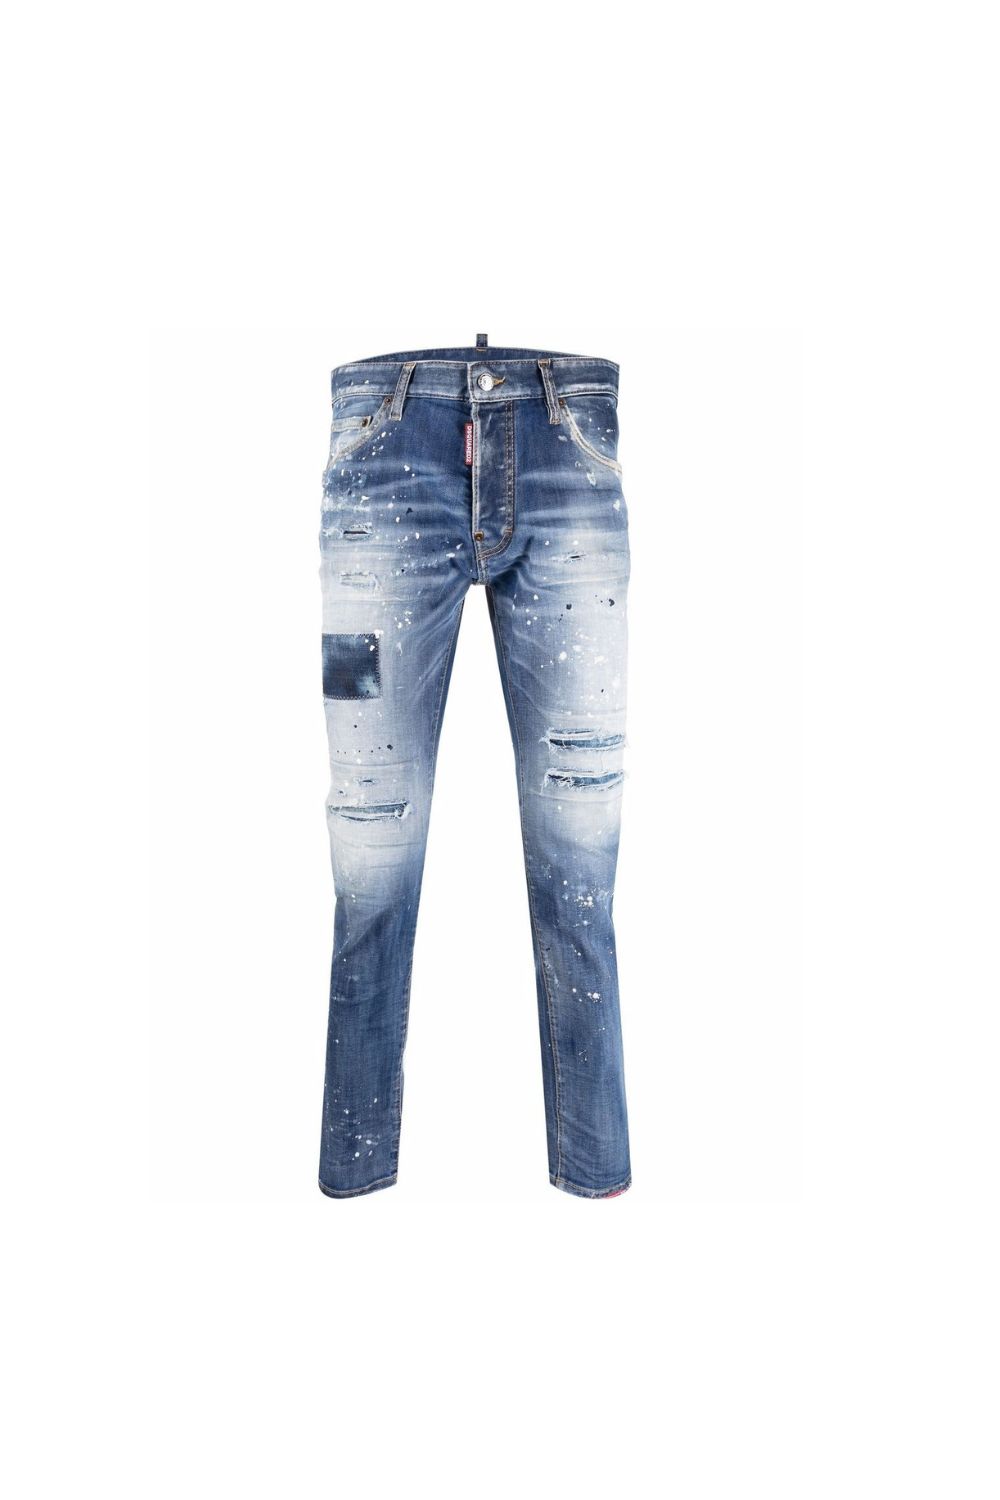 Dsquared2 “Cool Guy” Jeans